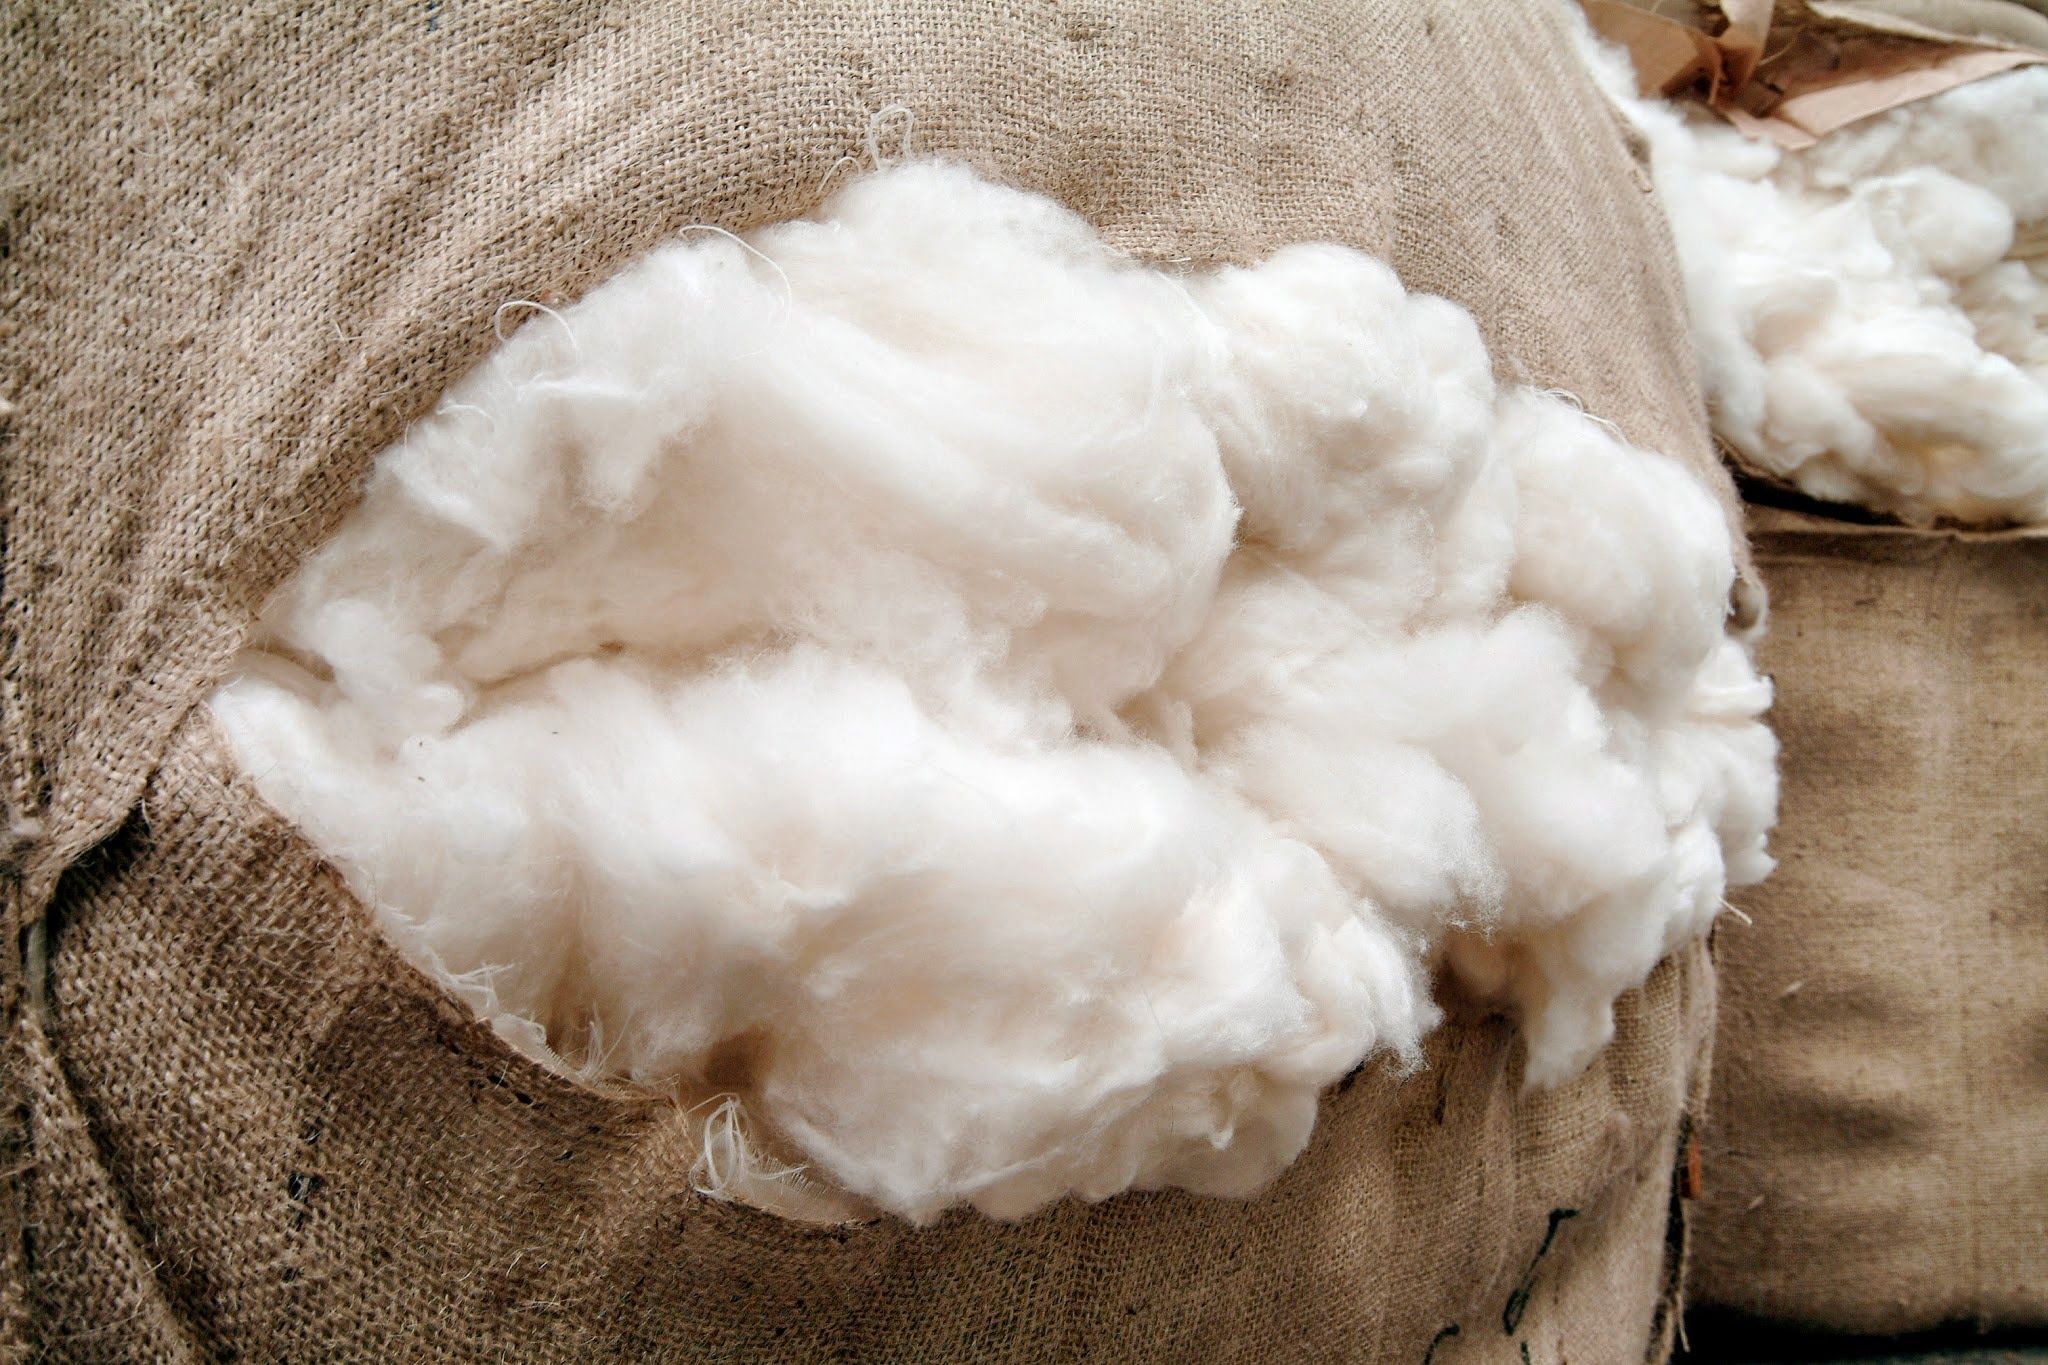 Guide To Washing & Caring For Your Cashmere